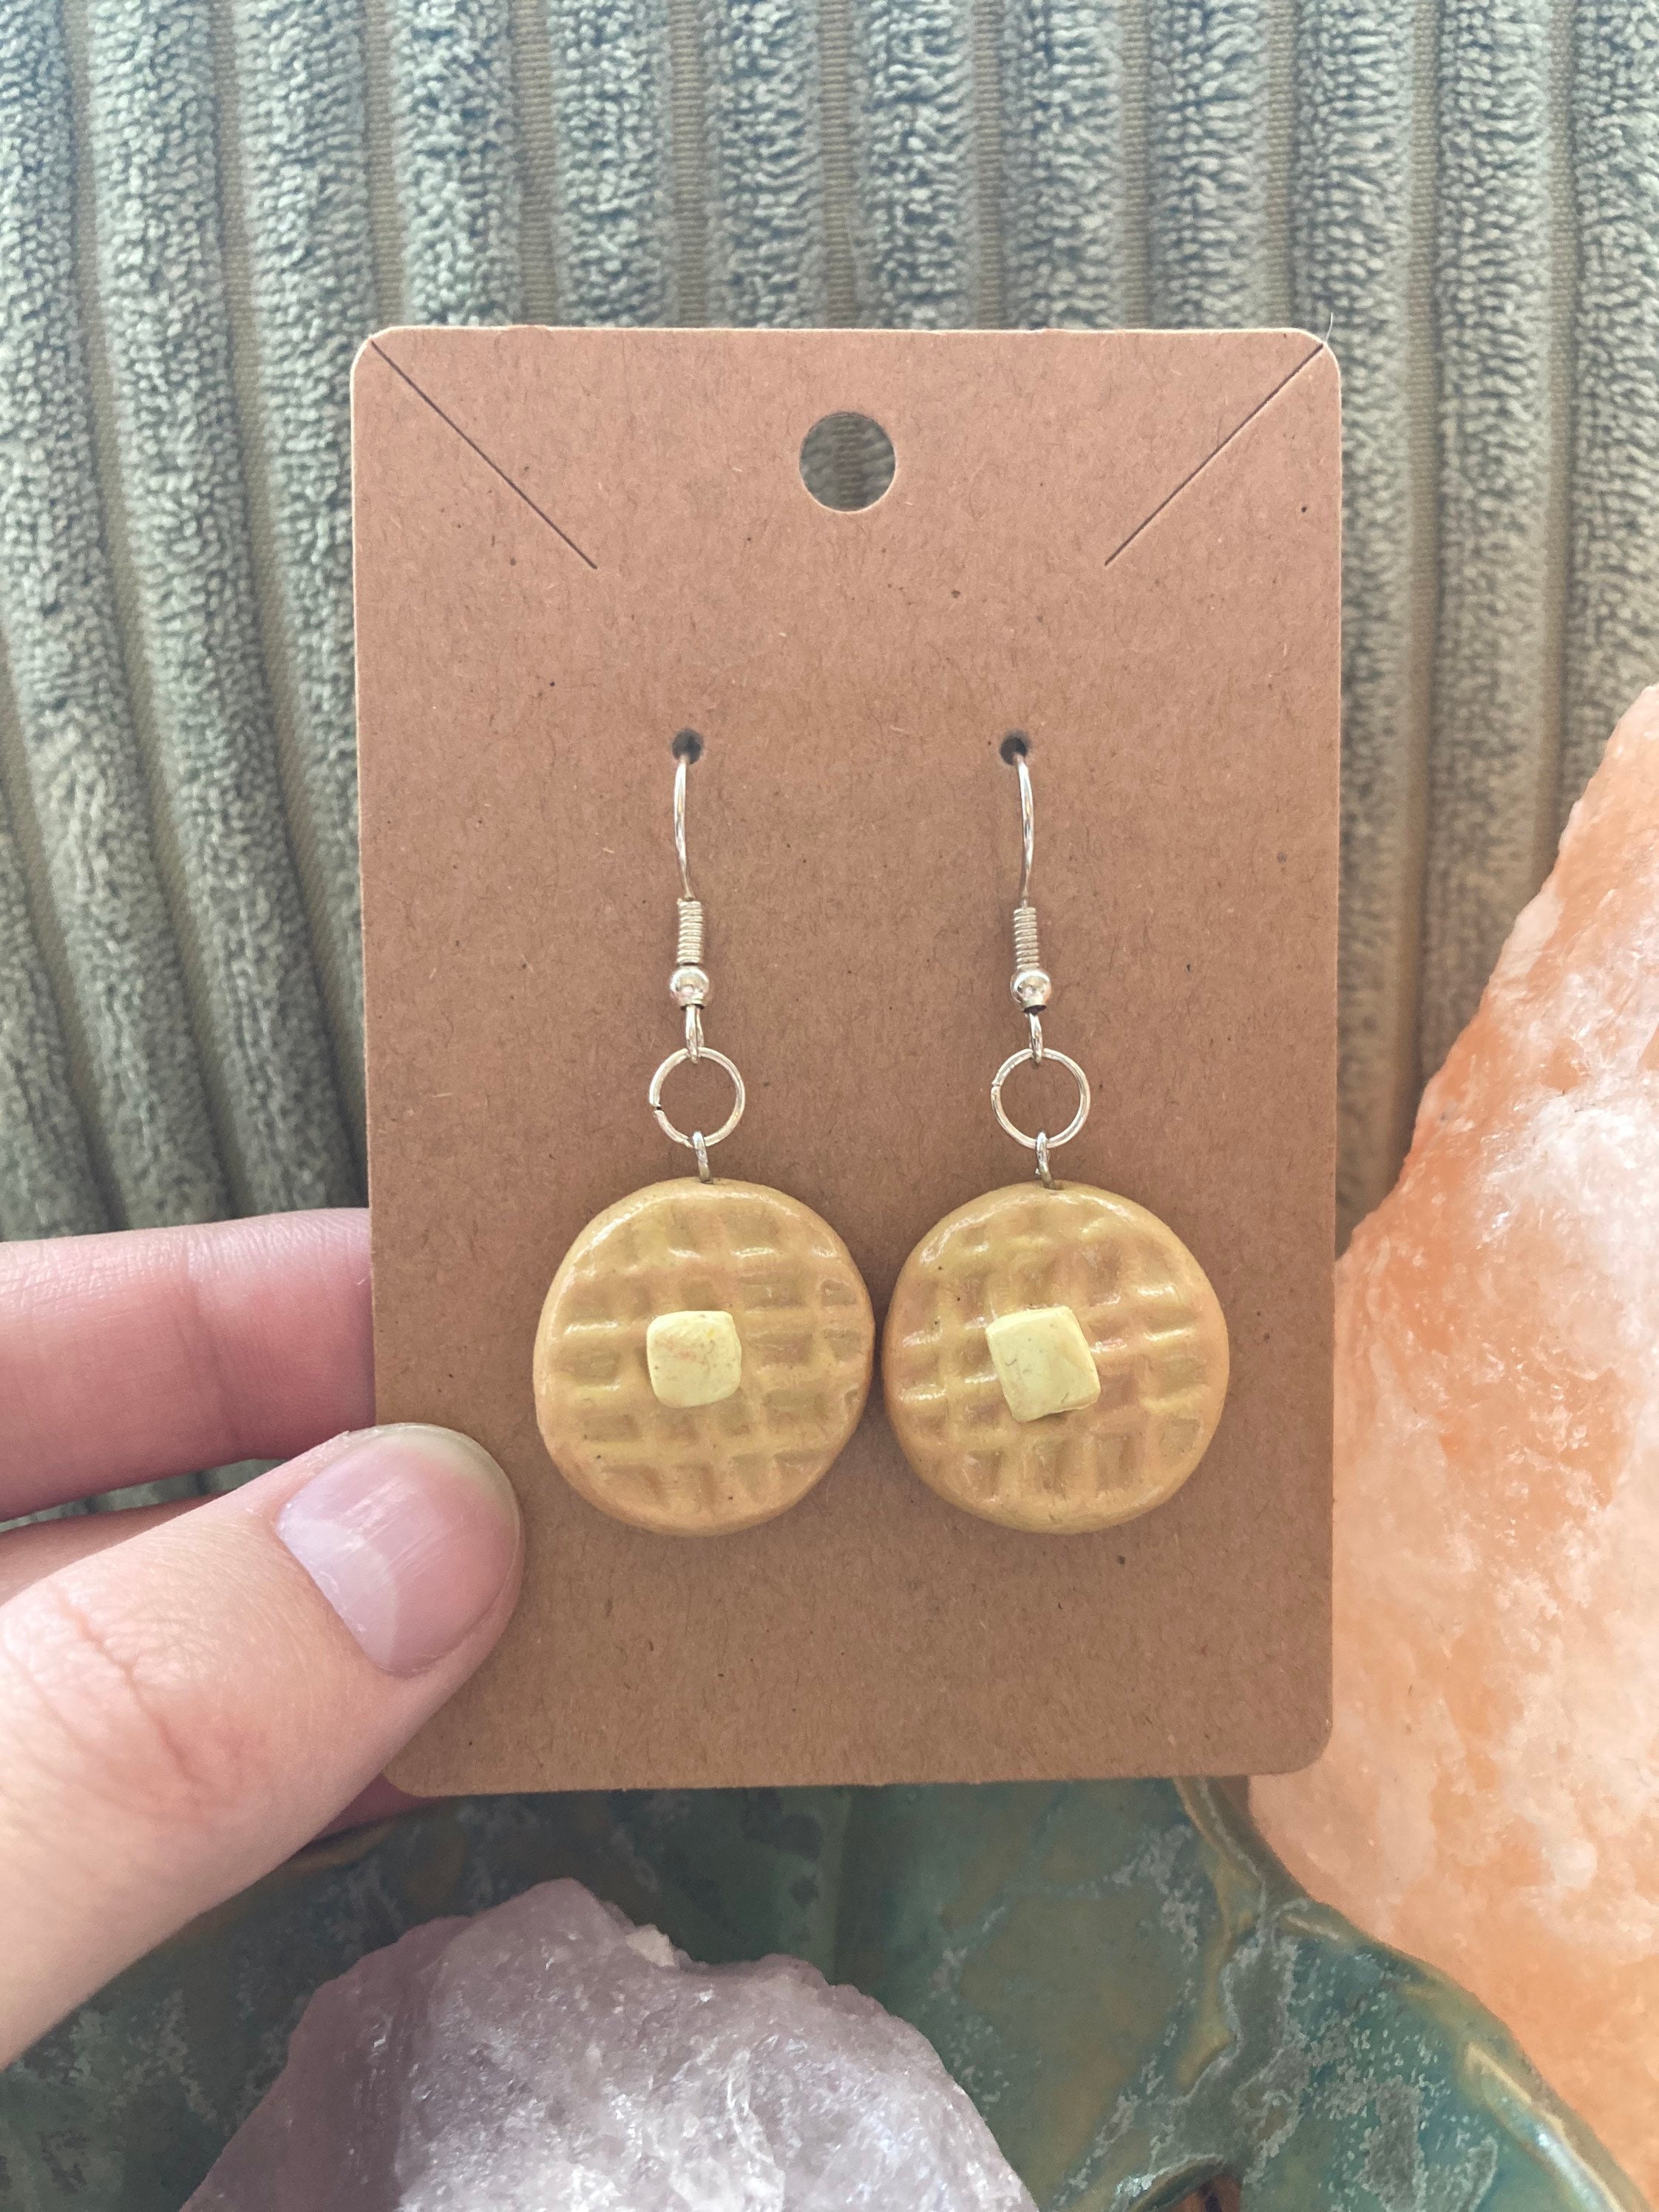 Ego Waffle Style Earrings for Women, Girls, Teens and More. Super Cute  Waffle House Style Earrings for Women. Eleven/ 11 Waffle Earrings from  Stranger